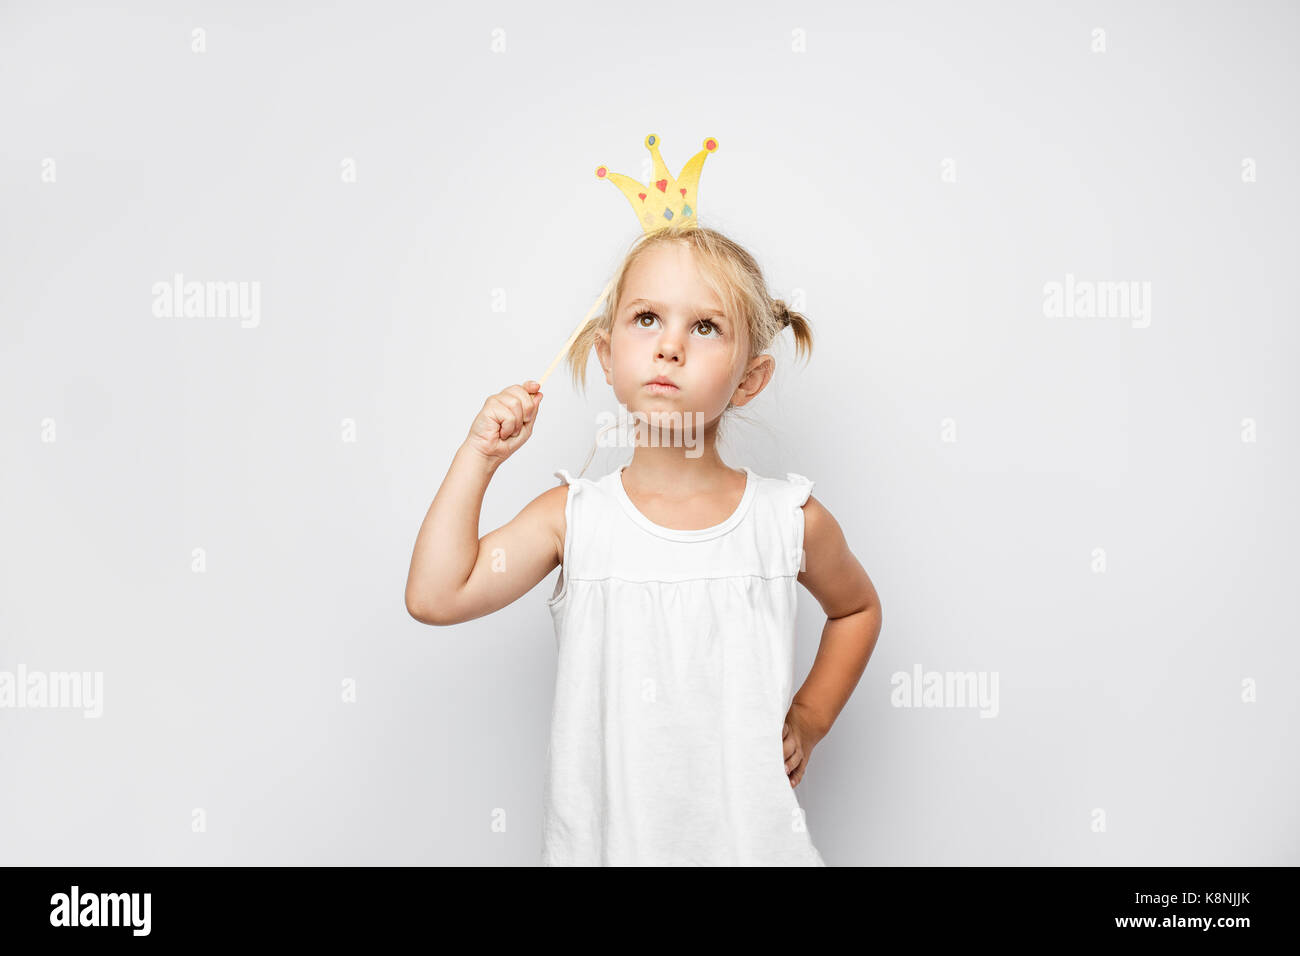 Beautiful little girl with paper crown posing on white backgroun Stock Photo